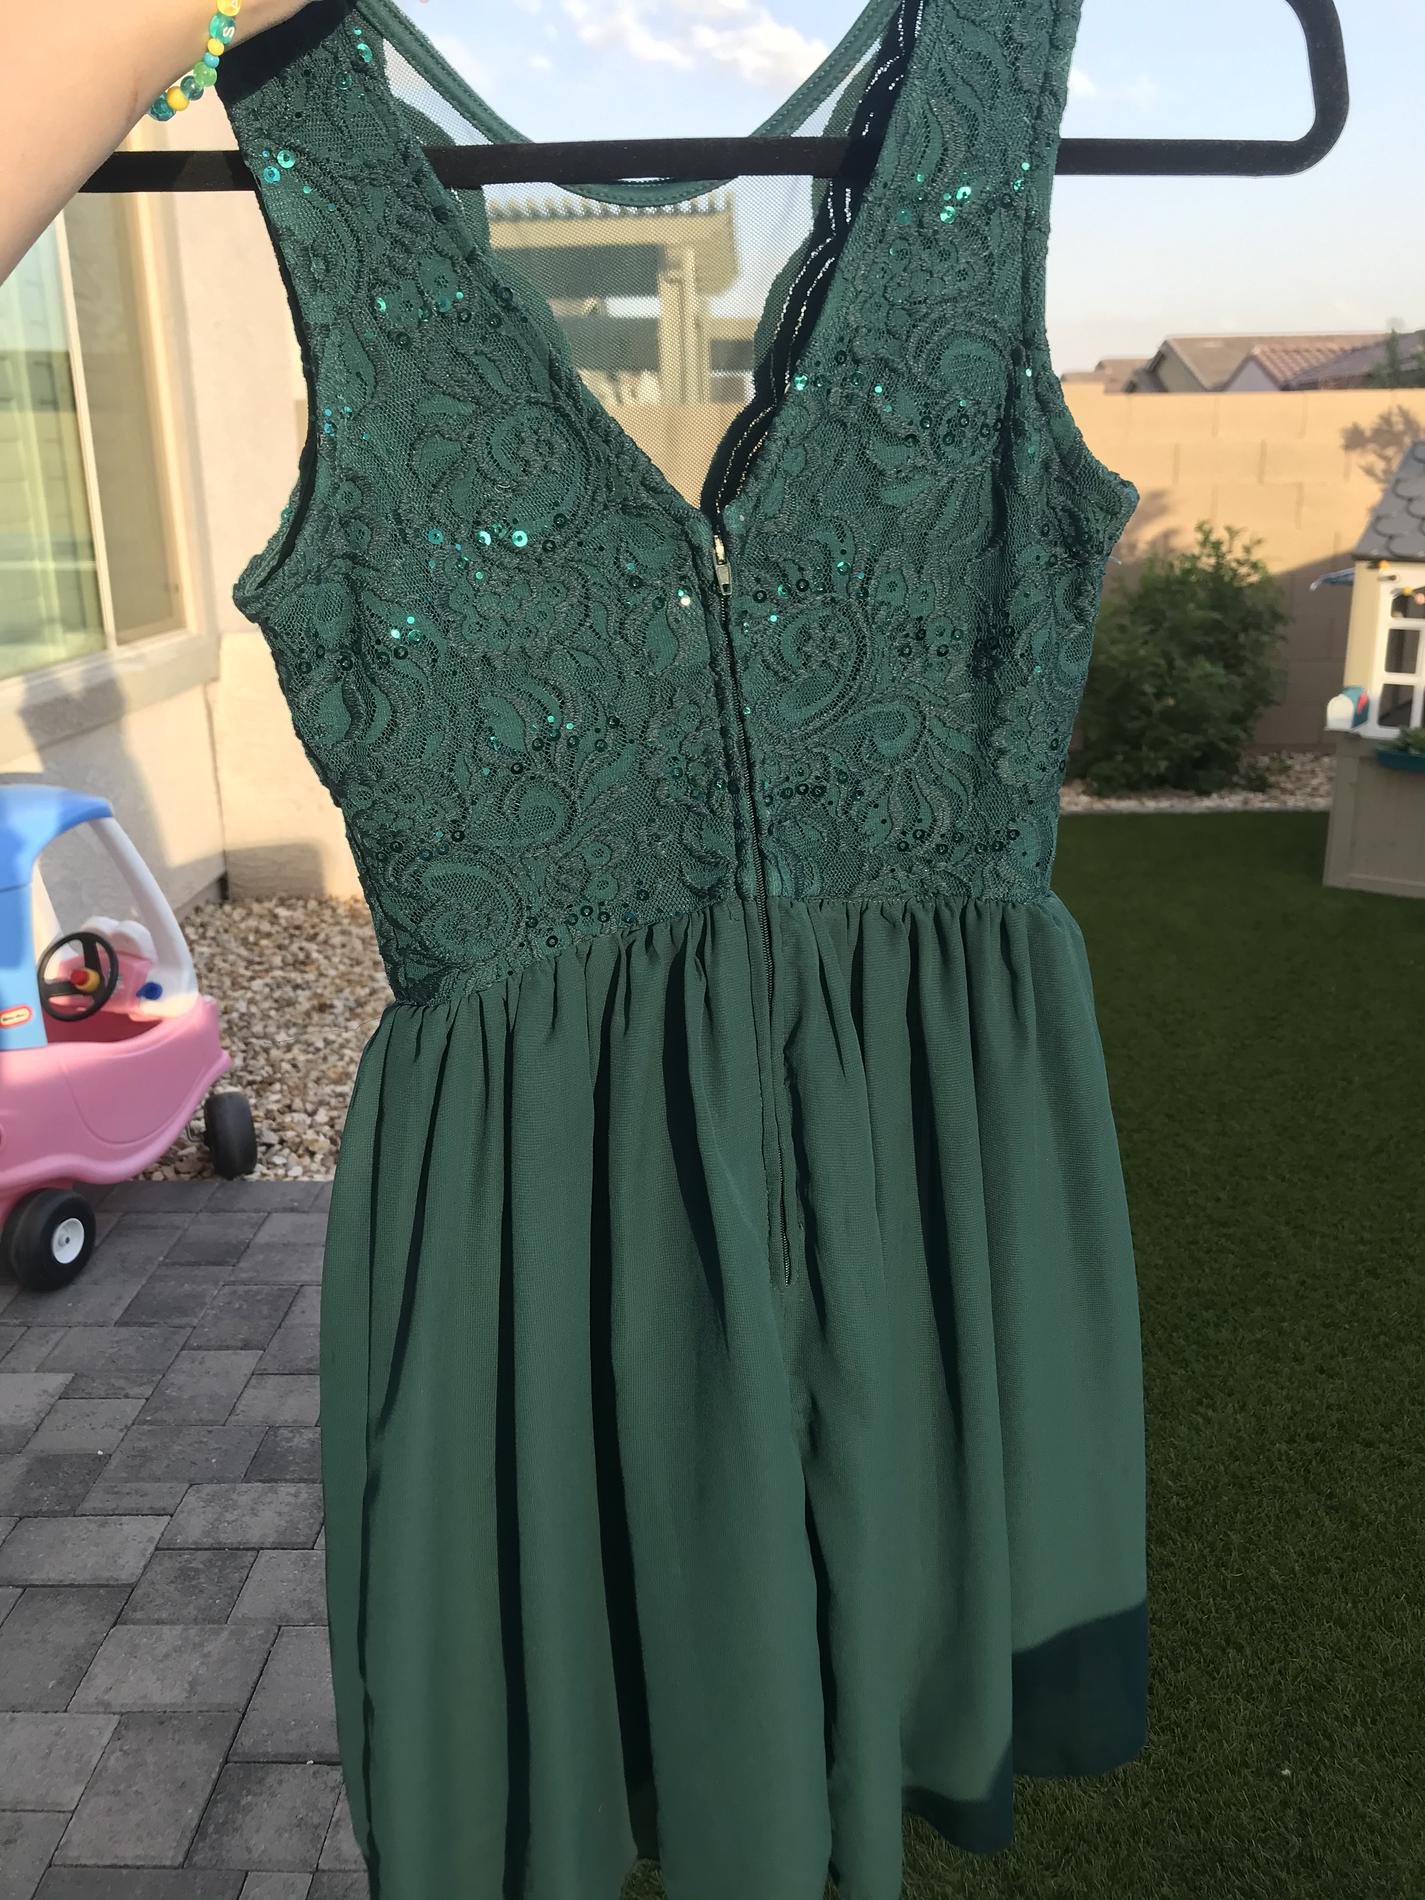 Green Size 0 A-line Dress on Queenly